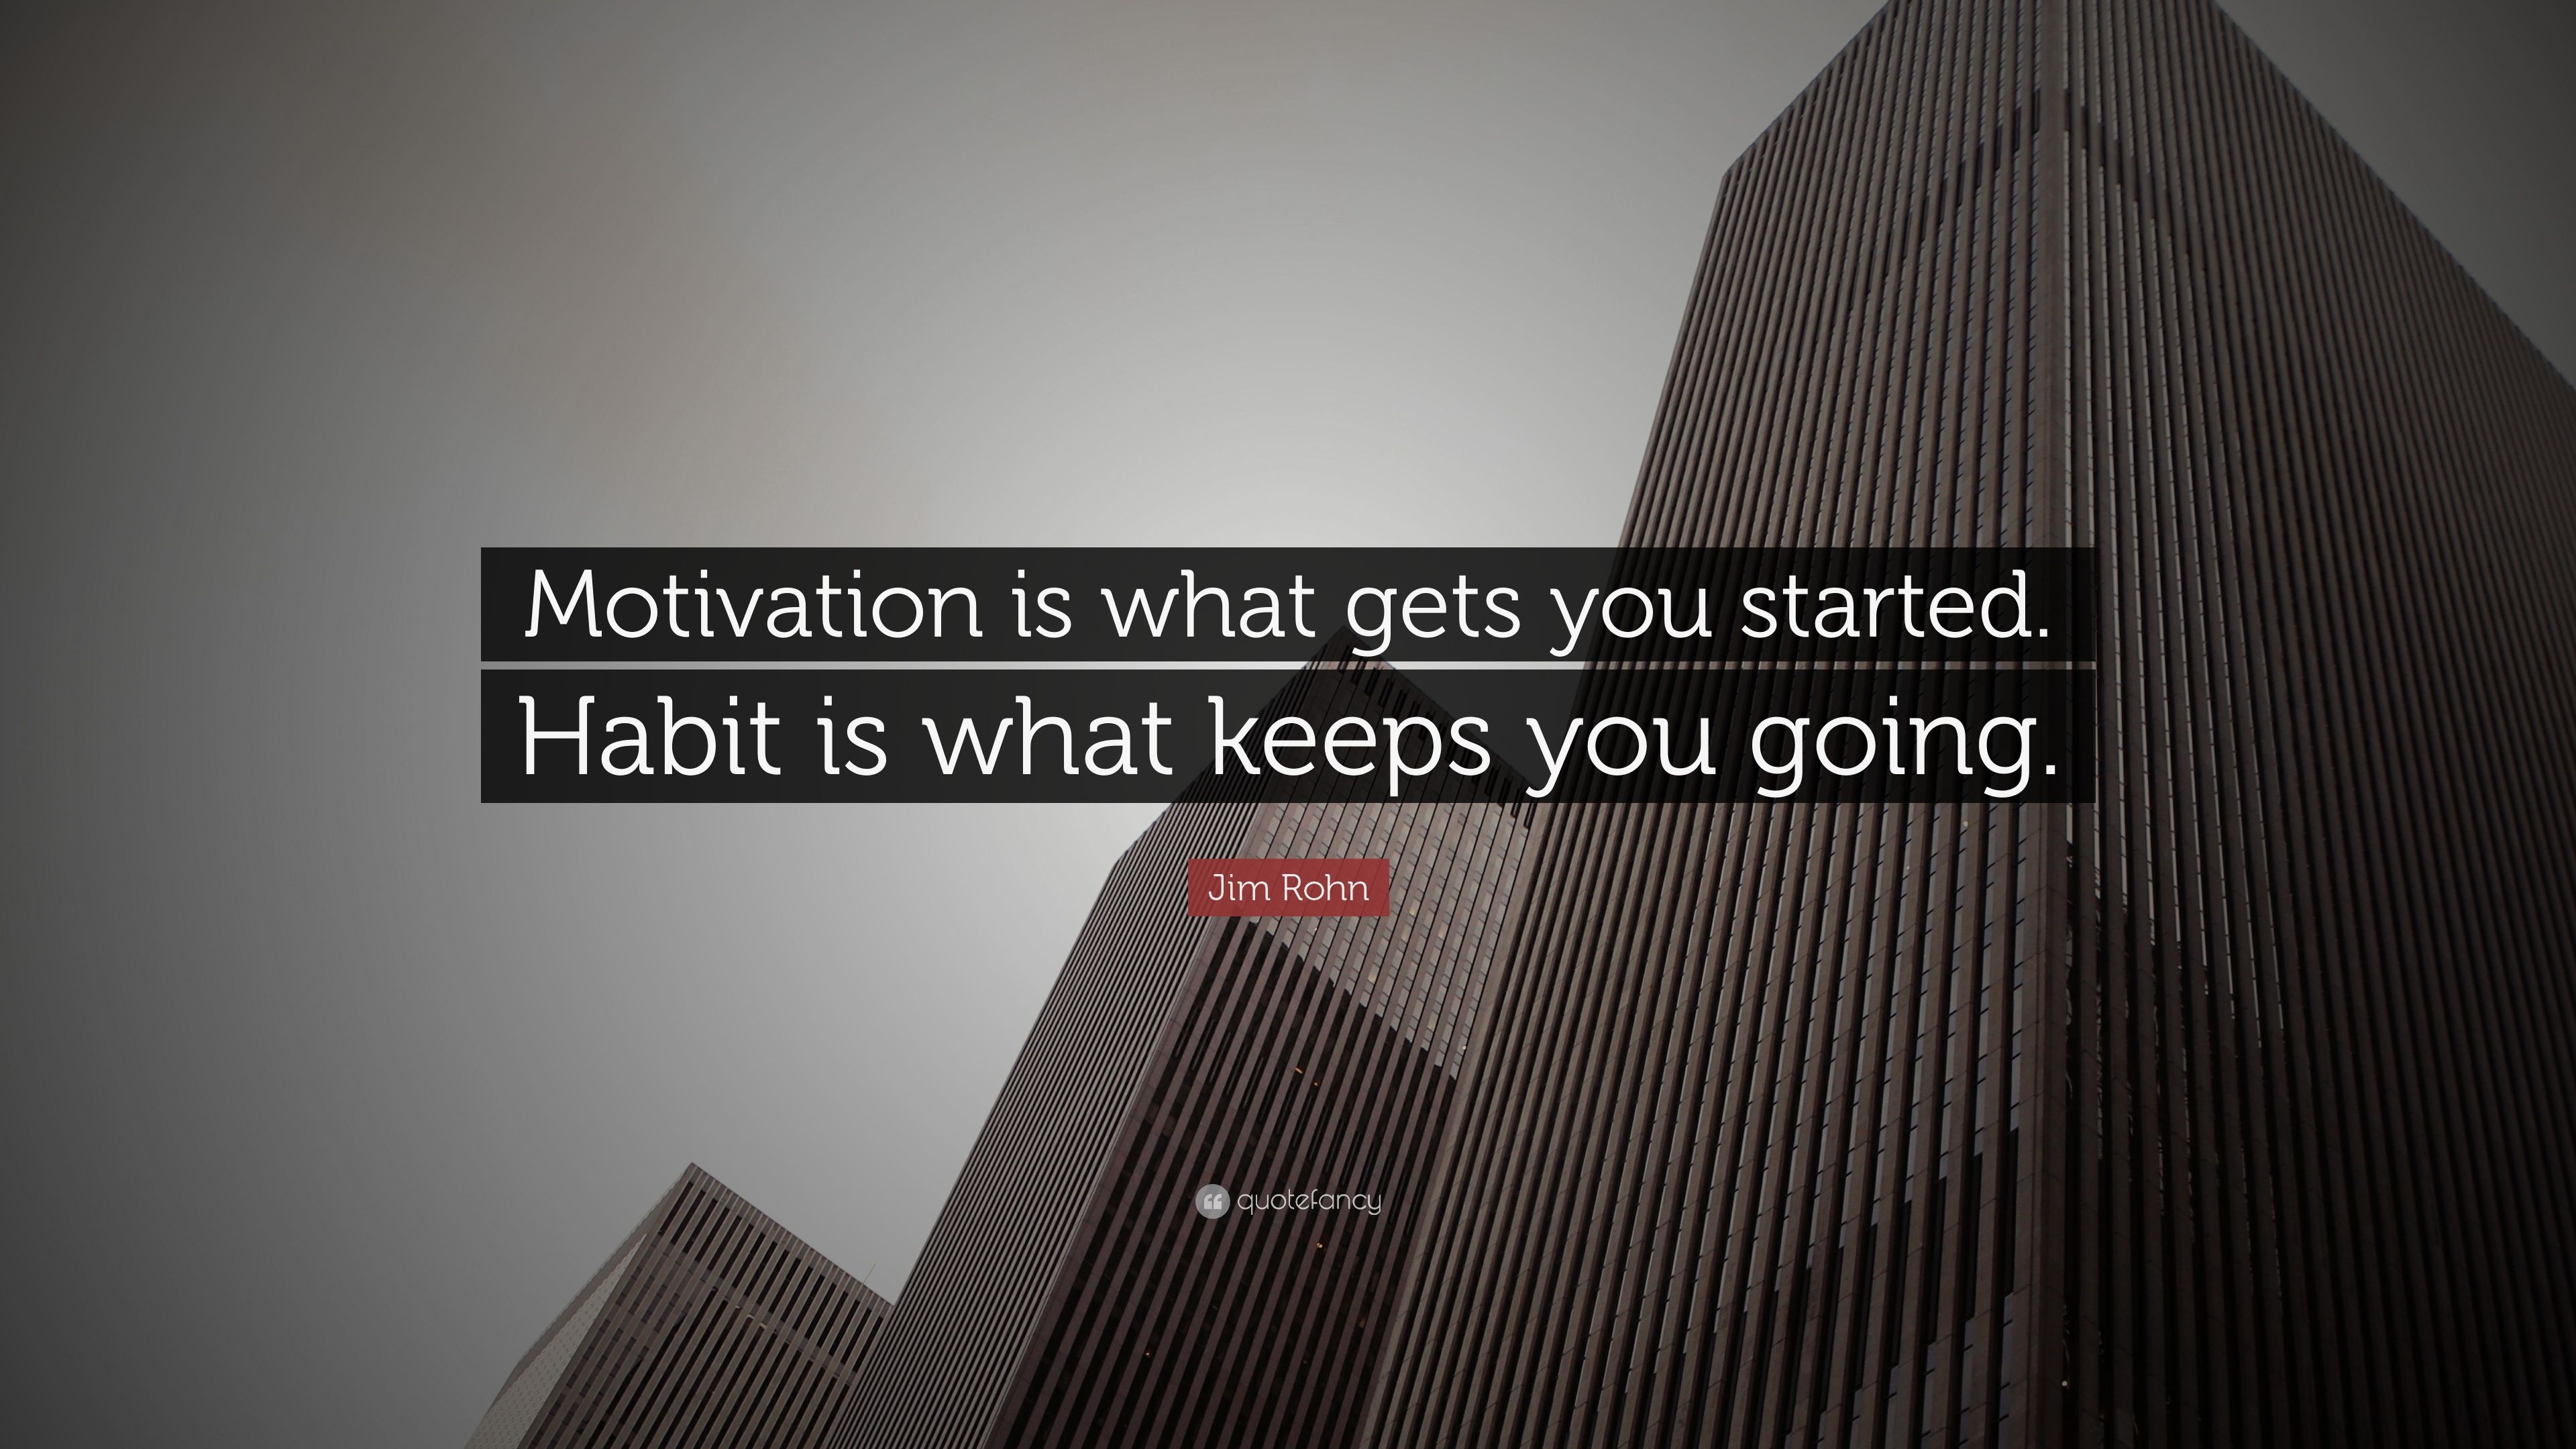 Jim Rohn Quote: “Motivation is what gets you started. Habit is